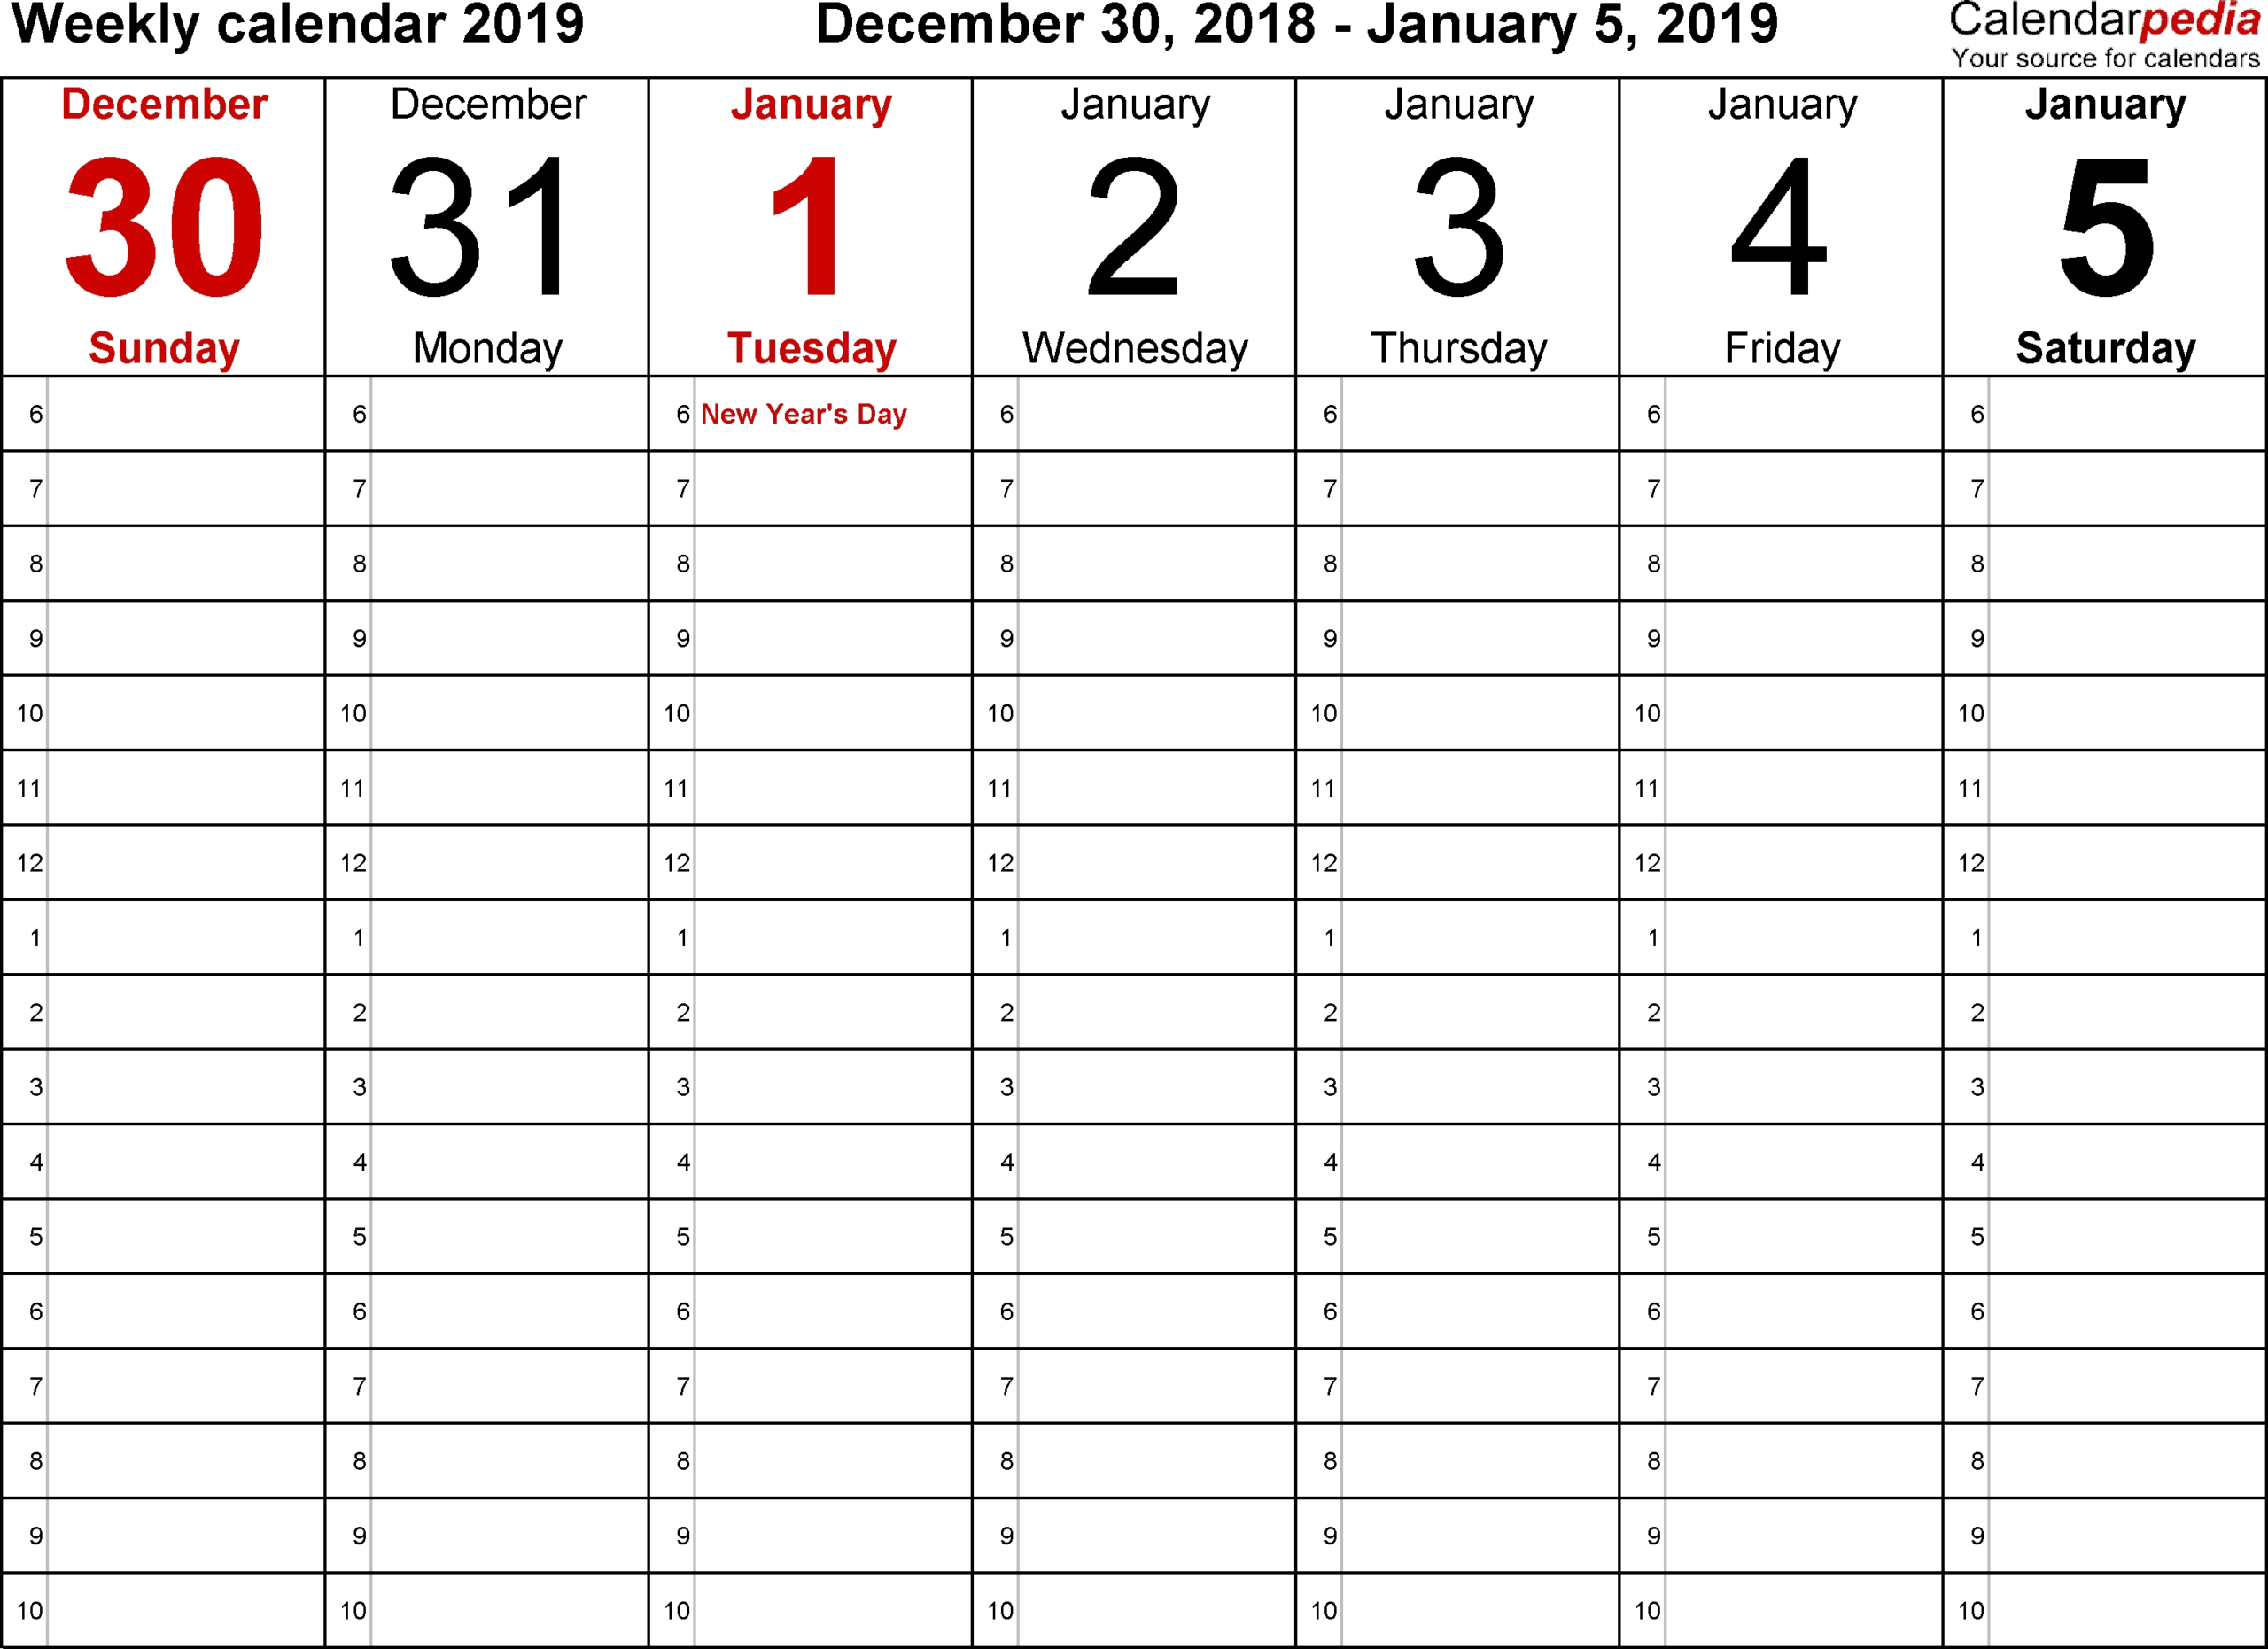 Blank Calendars To Print With Time Slots - Calendar